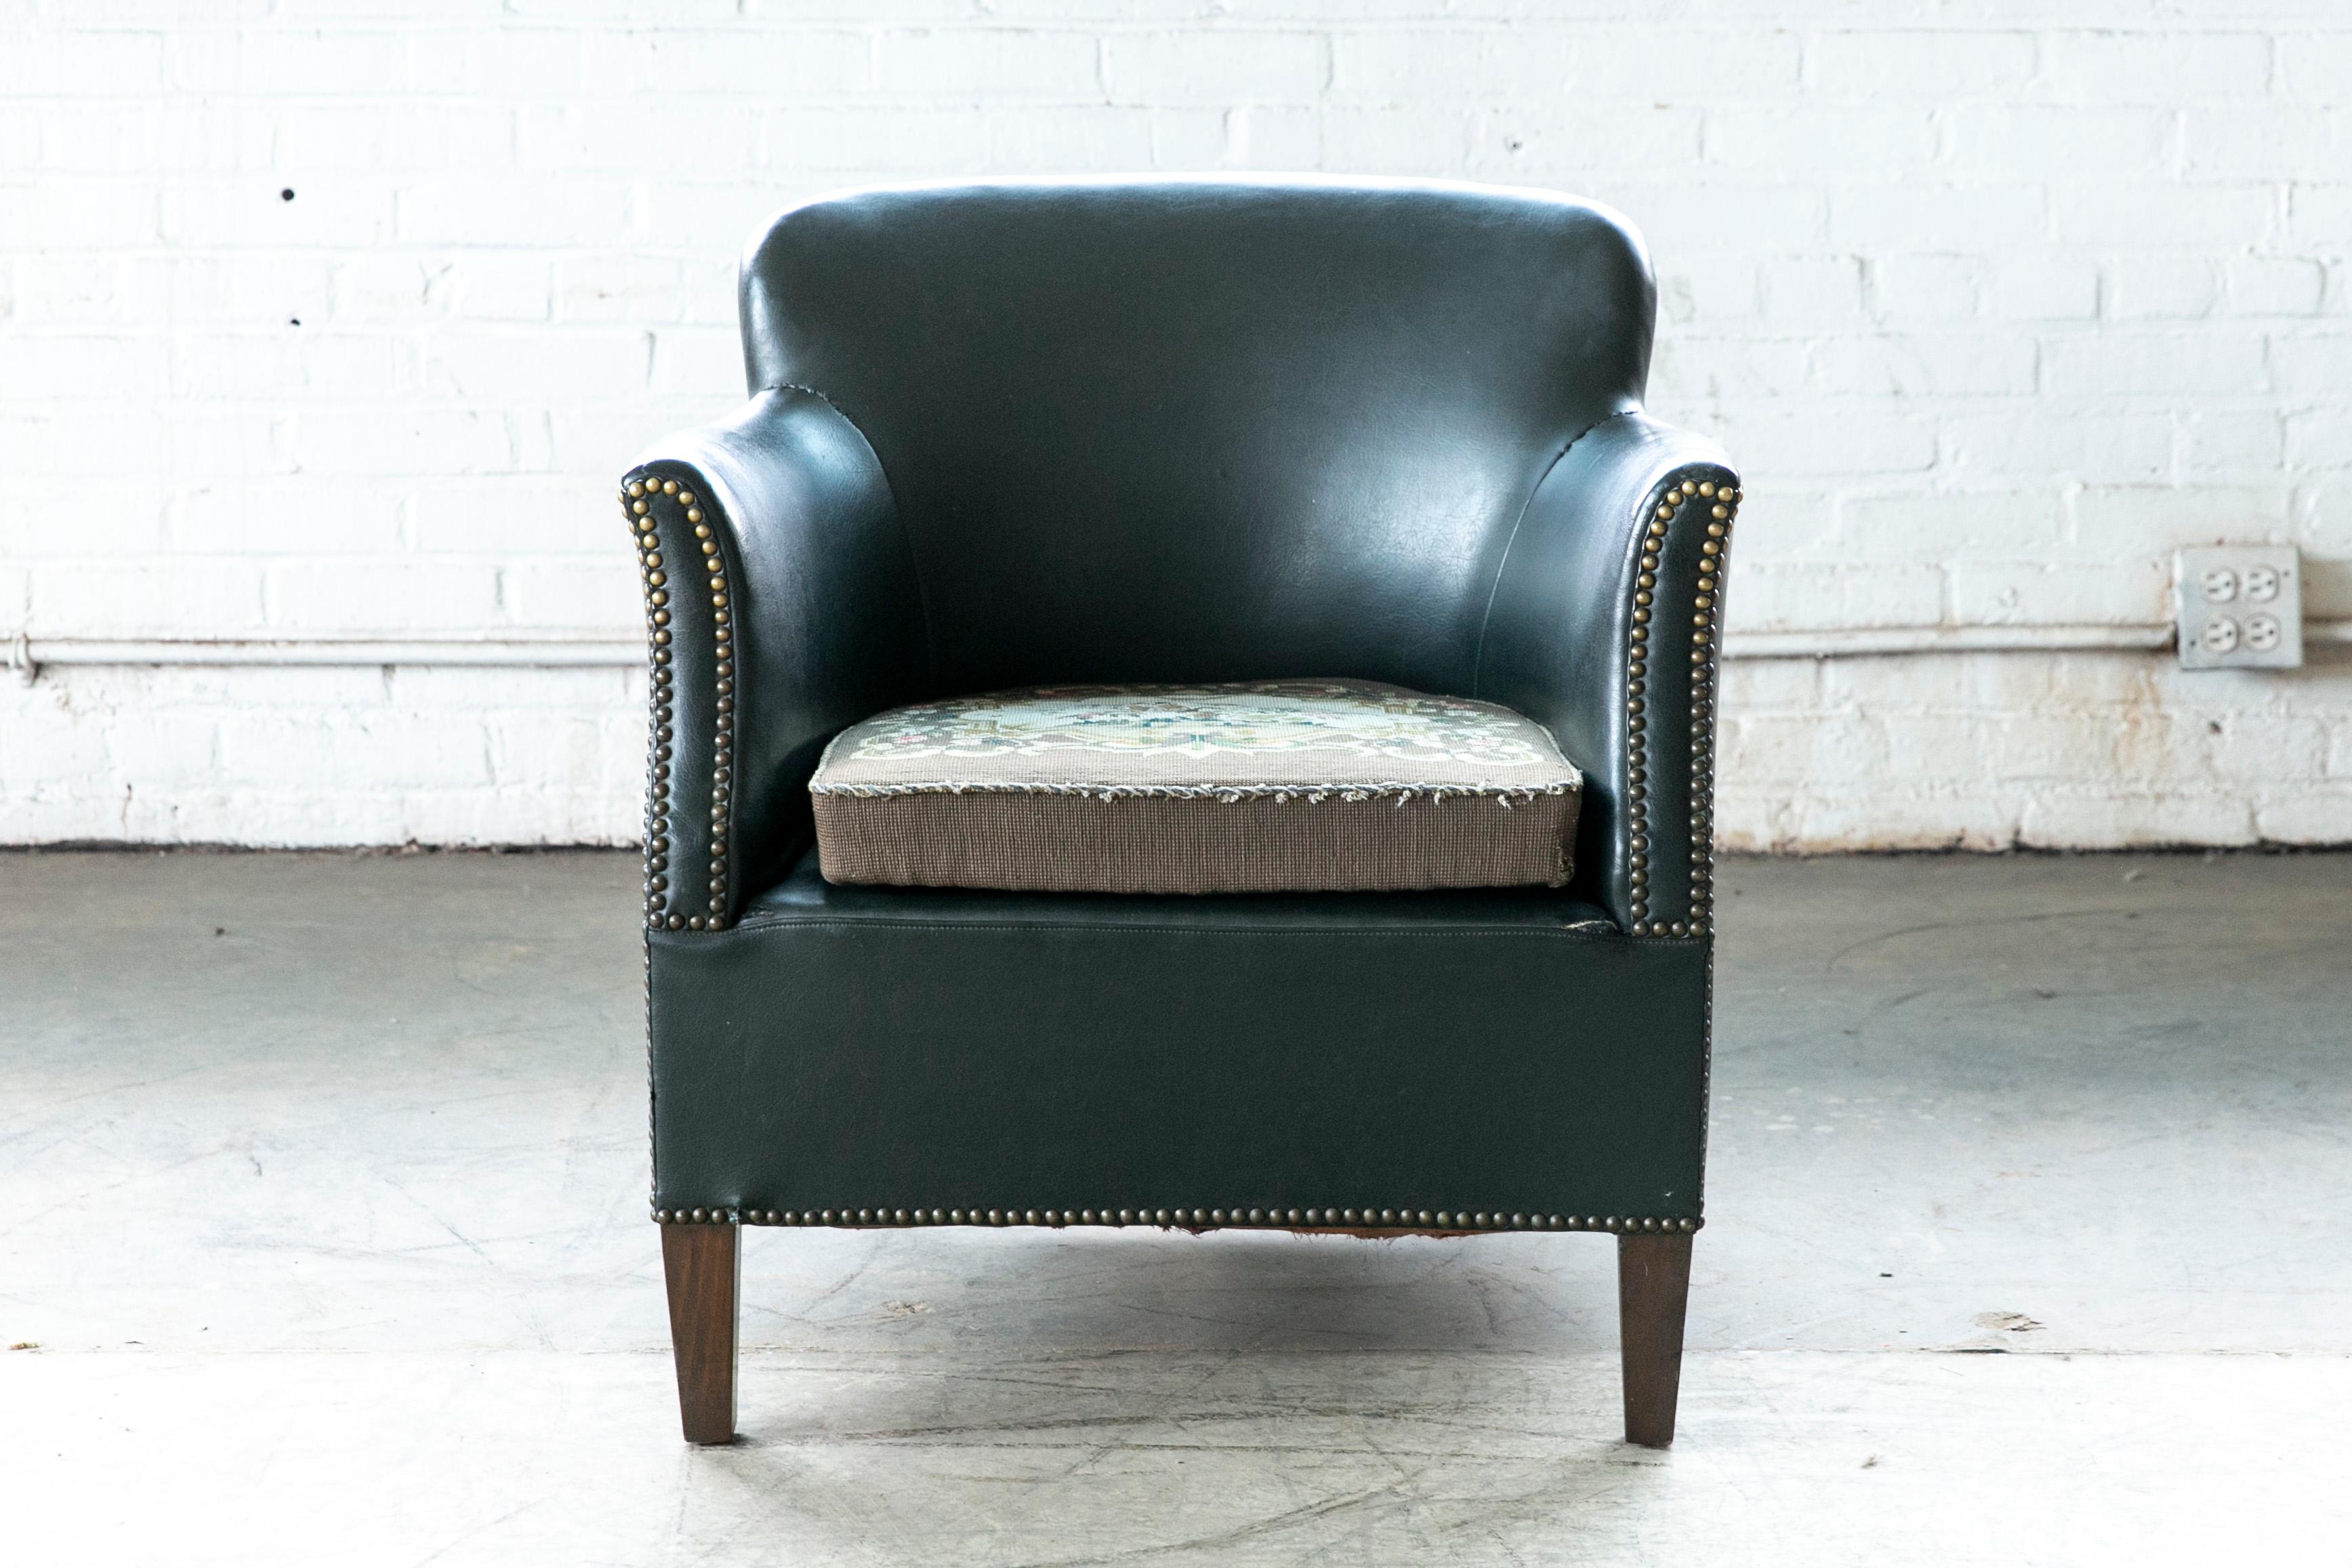 Mid-20th Century Danish 1940s Small-Scale Club Chair in Dark Green Leather